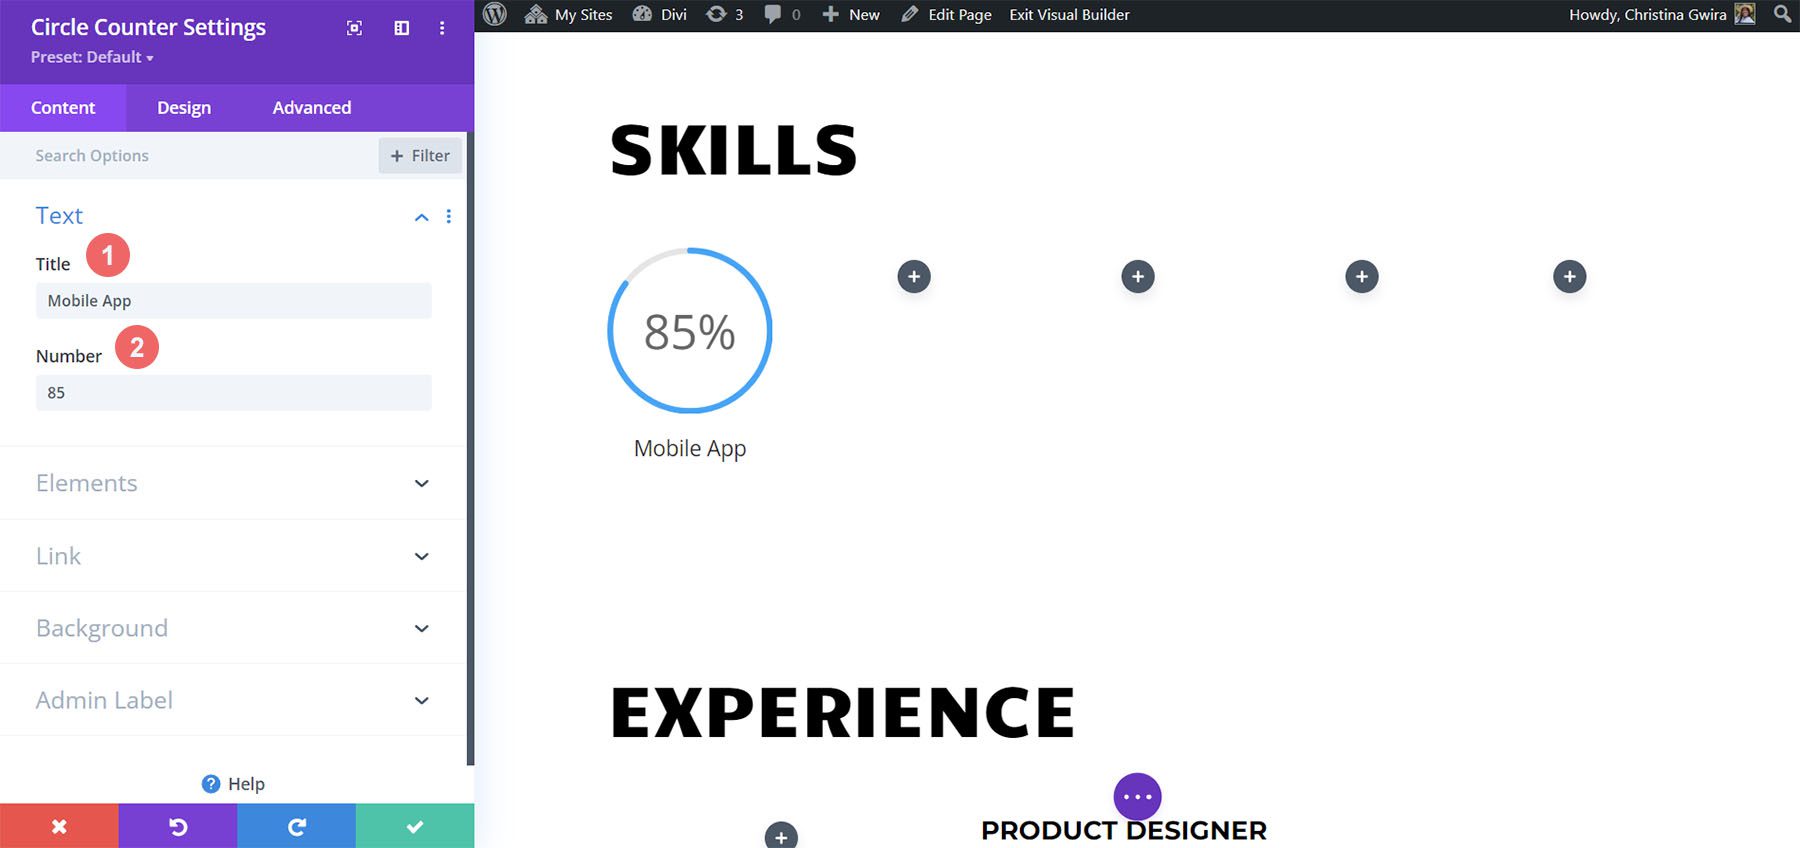 Adding text content to Circle Counter Module in our online resume website design